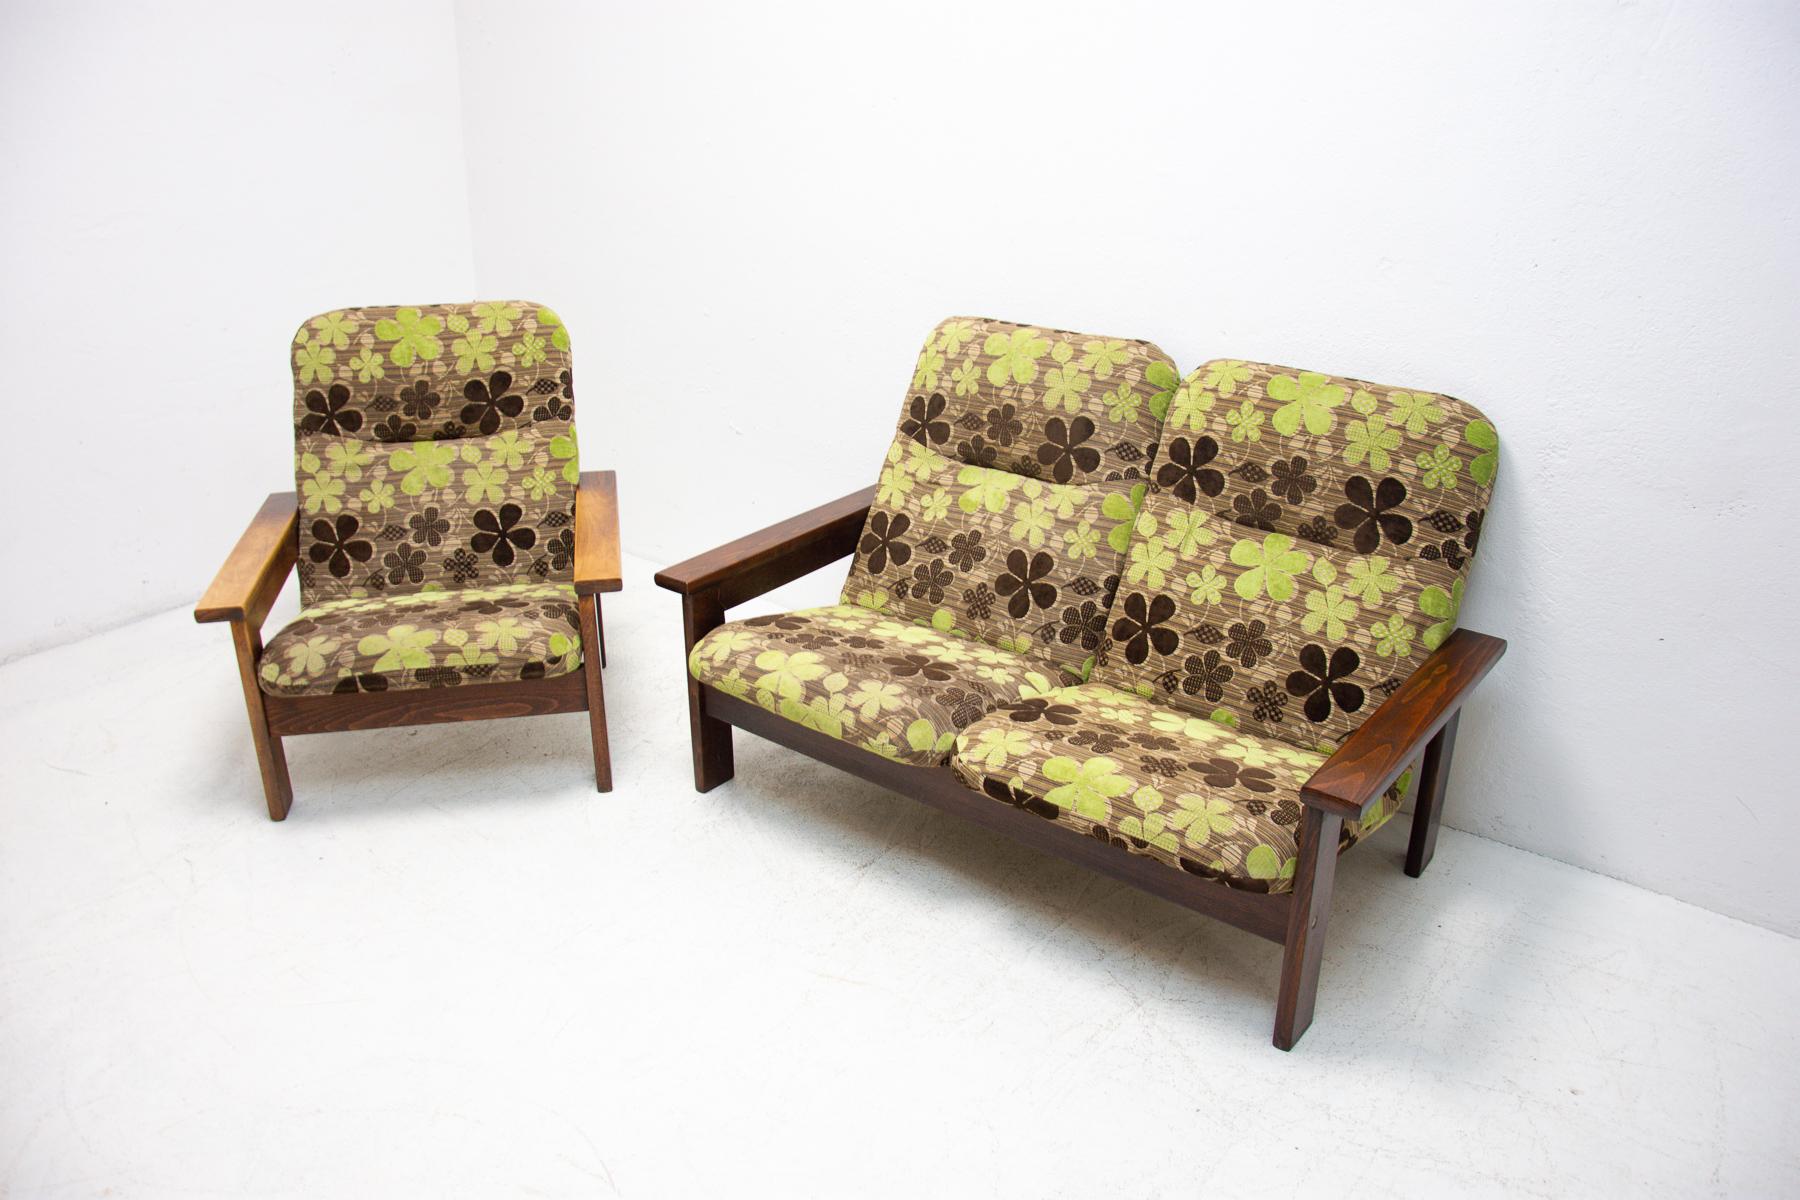 Czech Vintage Scandinavian Style Seating Set, 1980's For Sale